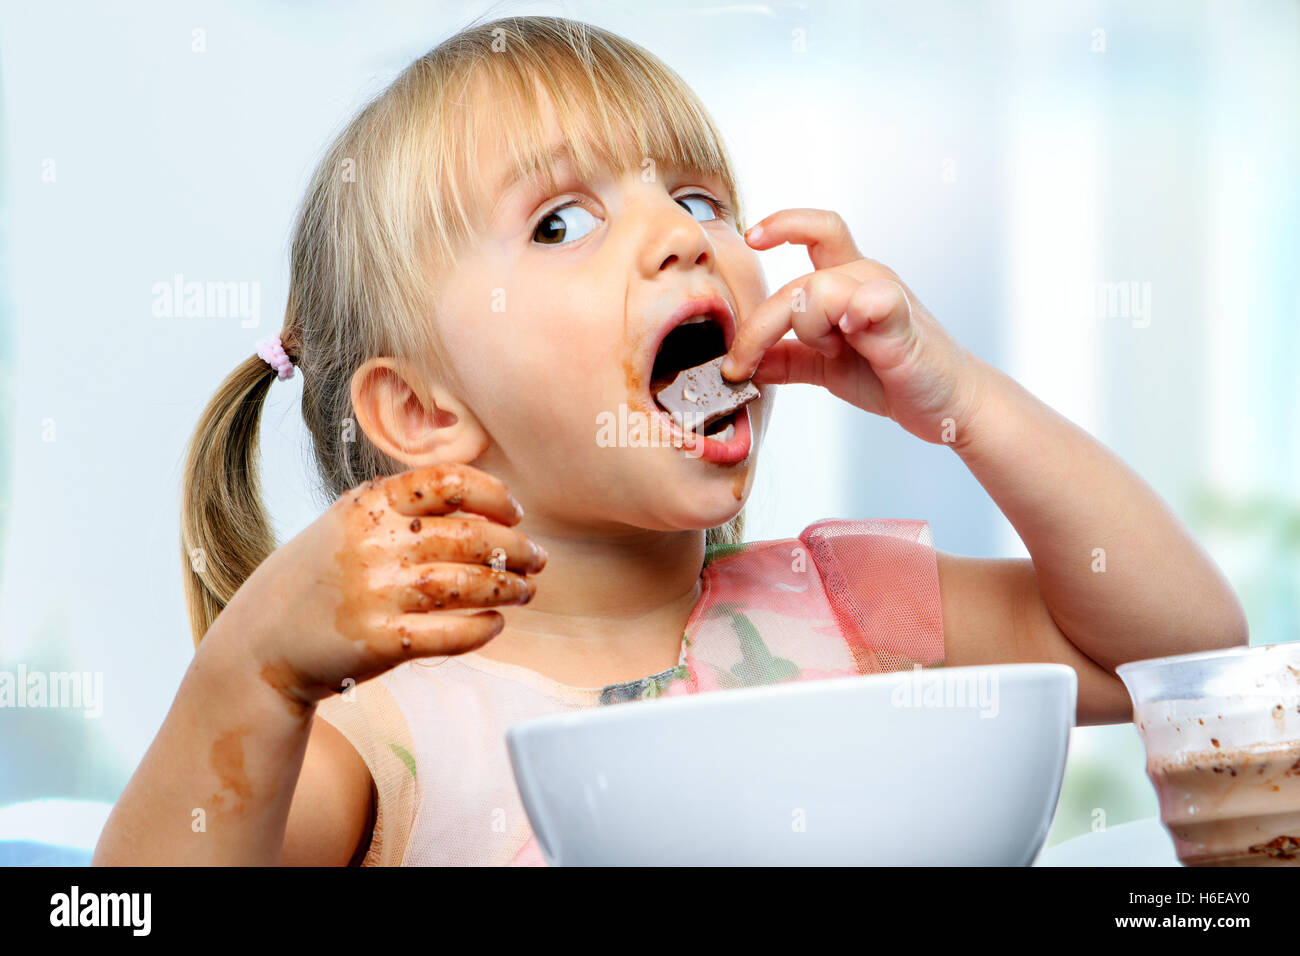 Close up portrait of infant eating and messing with chocolate at breakfast. Stock Photo